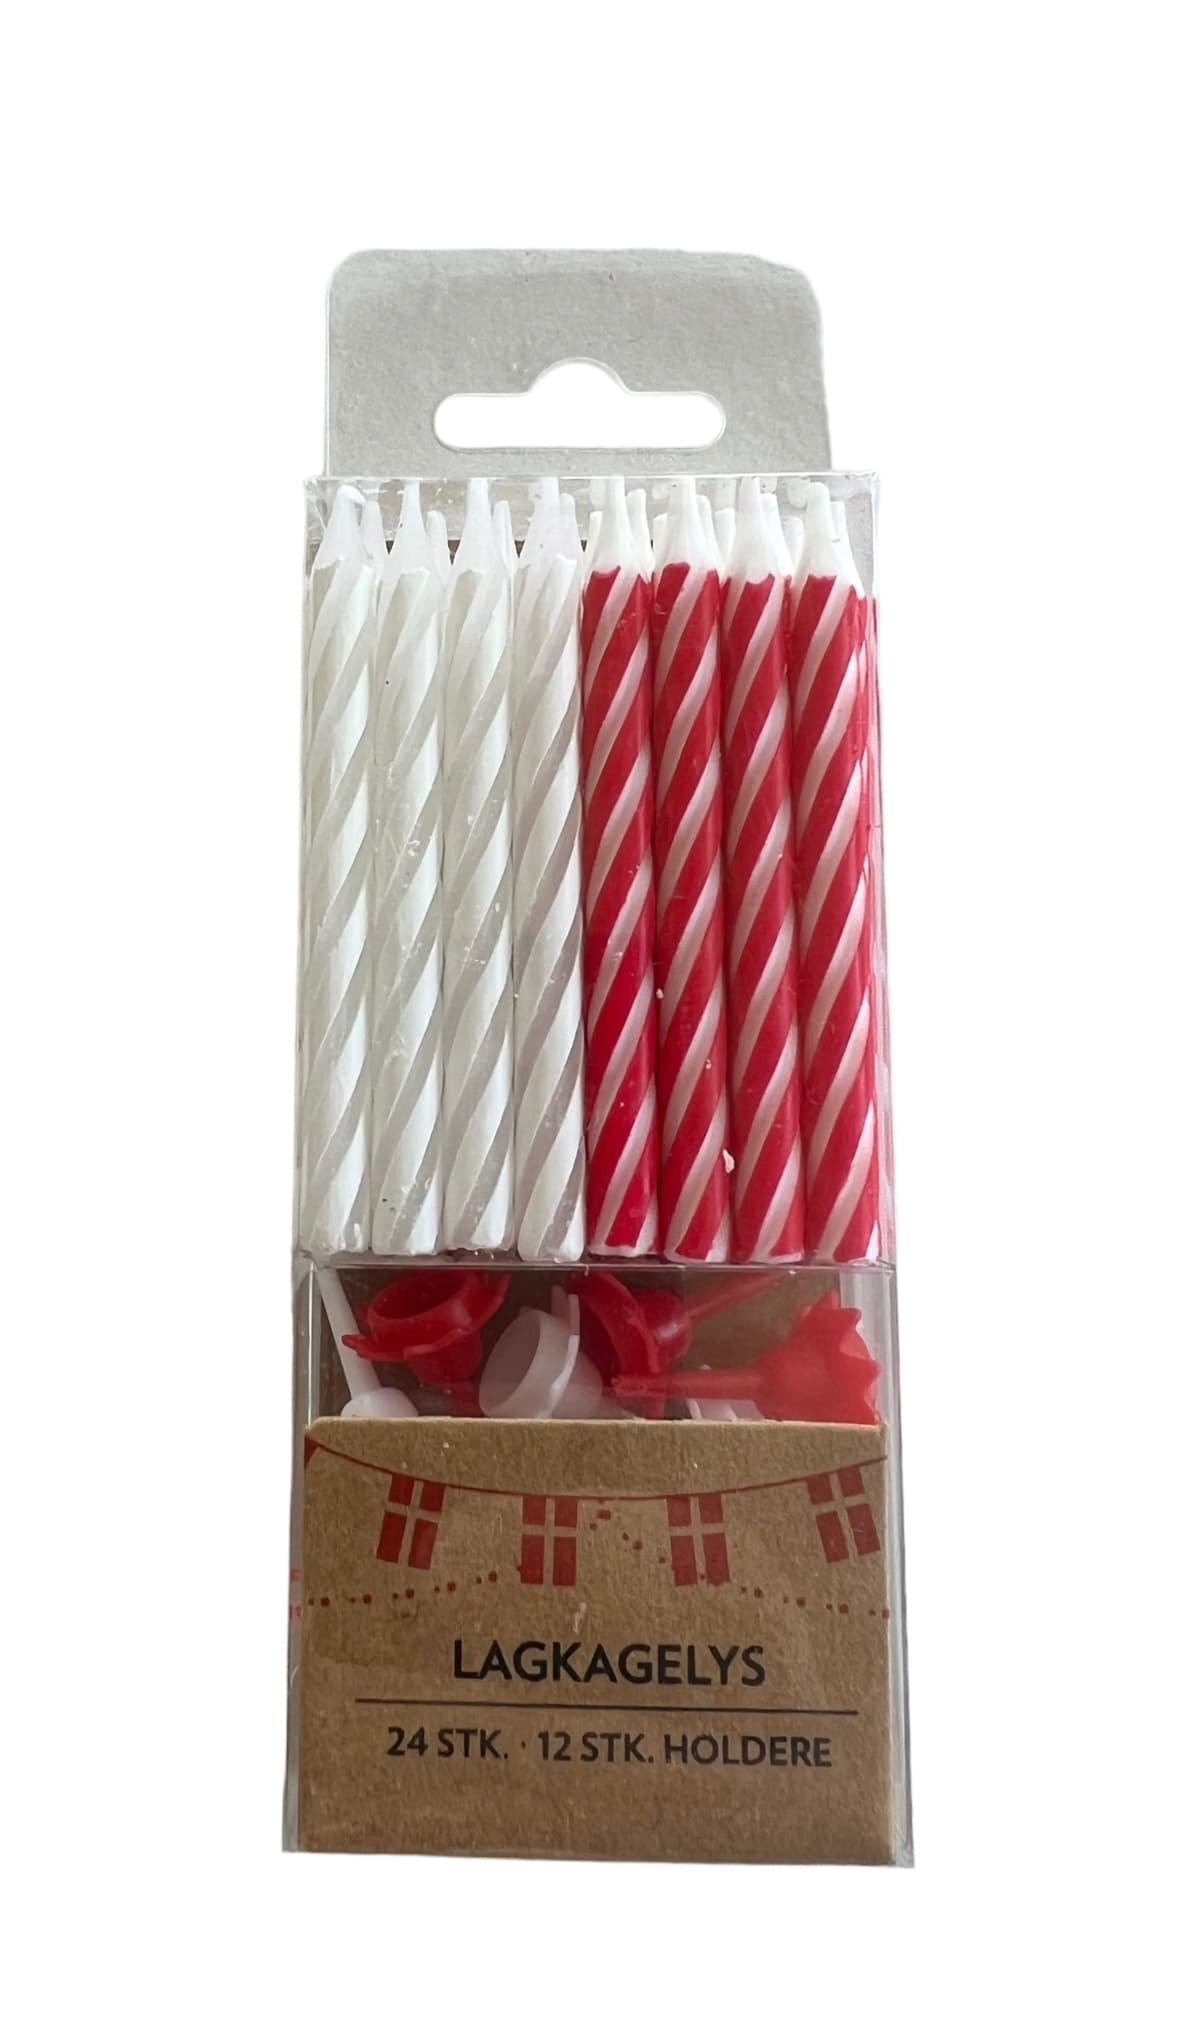 24 Birthday candles, white and red stripes